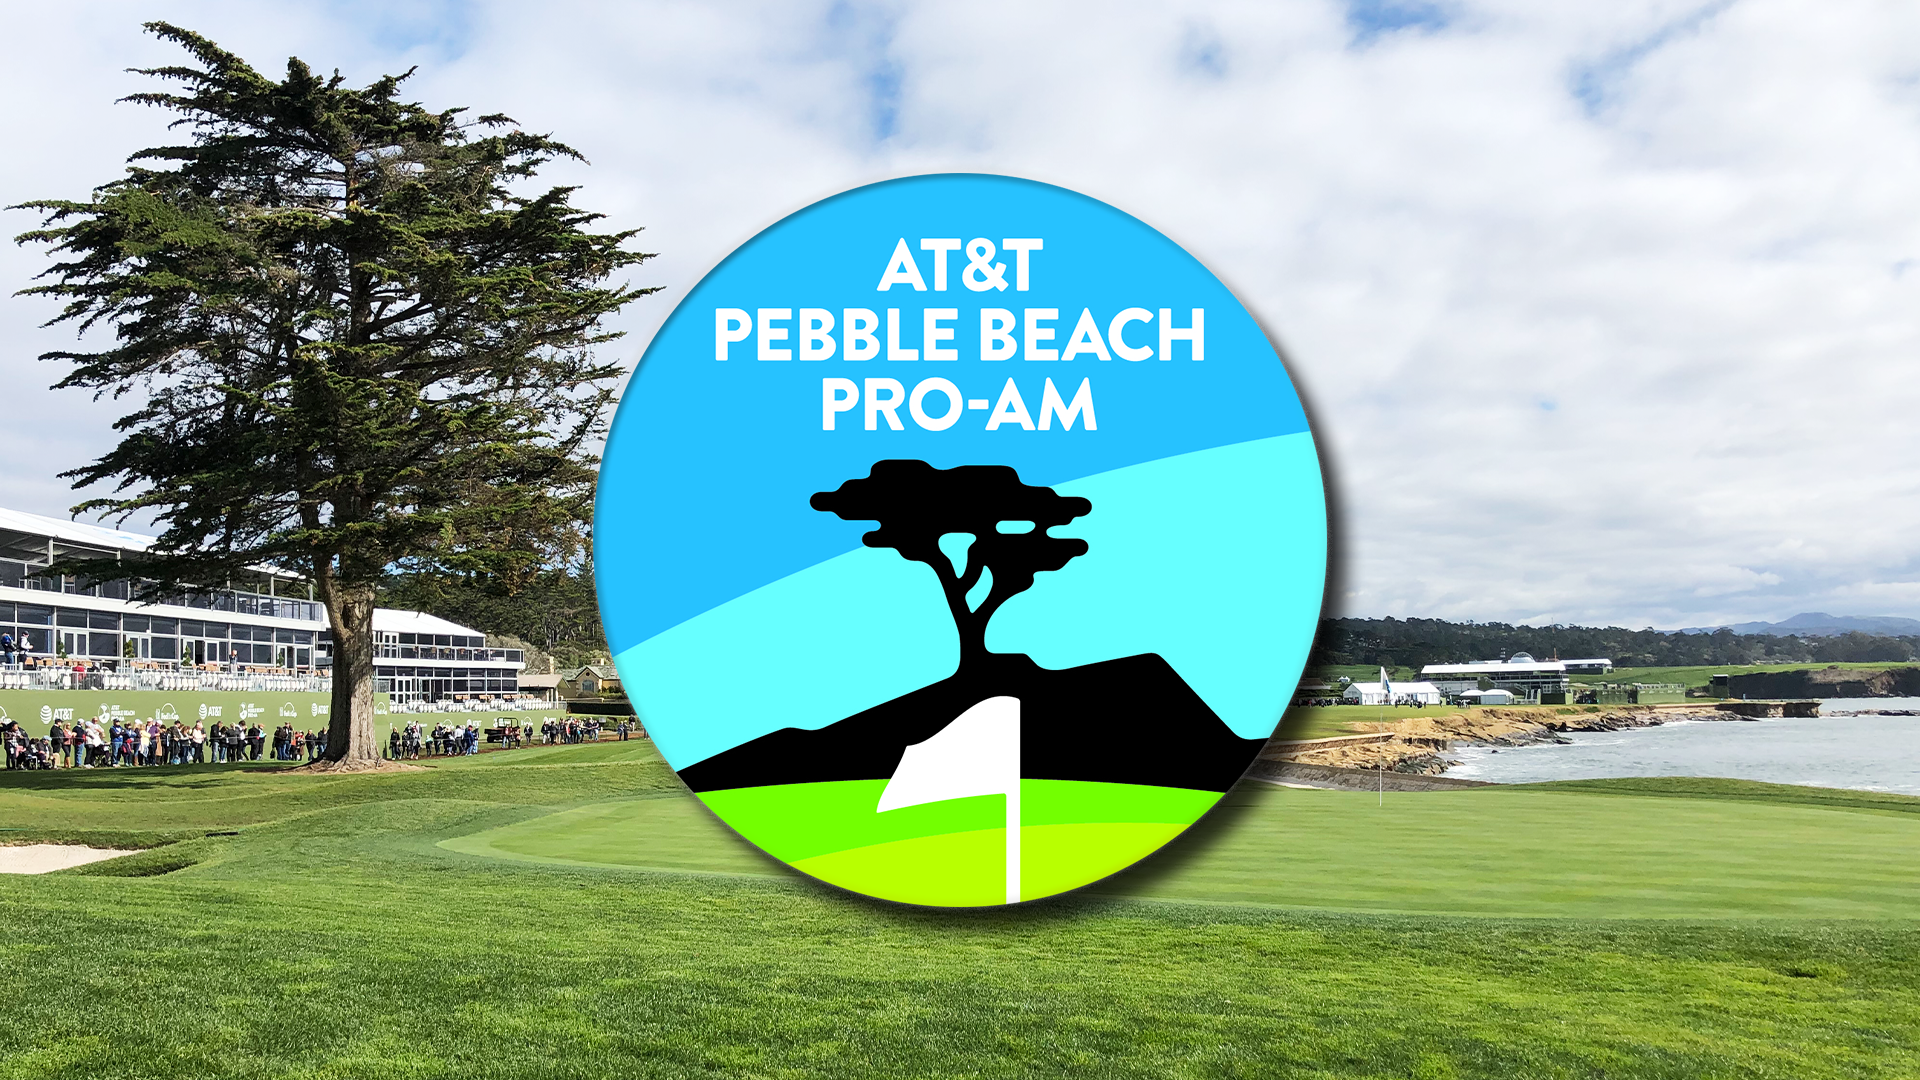 2020 ATandT Pebble Beach Pro-Am Schedule of events